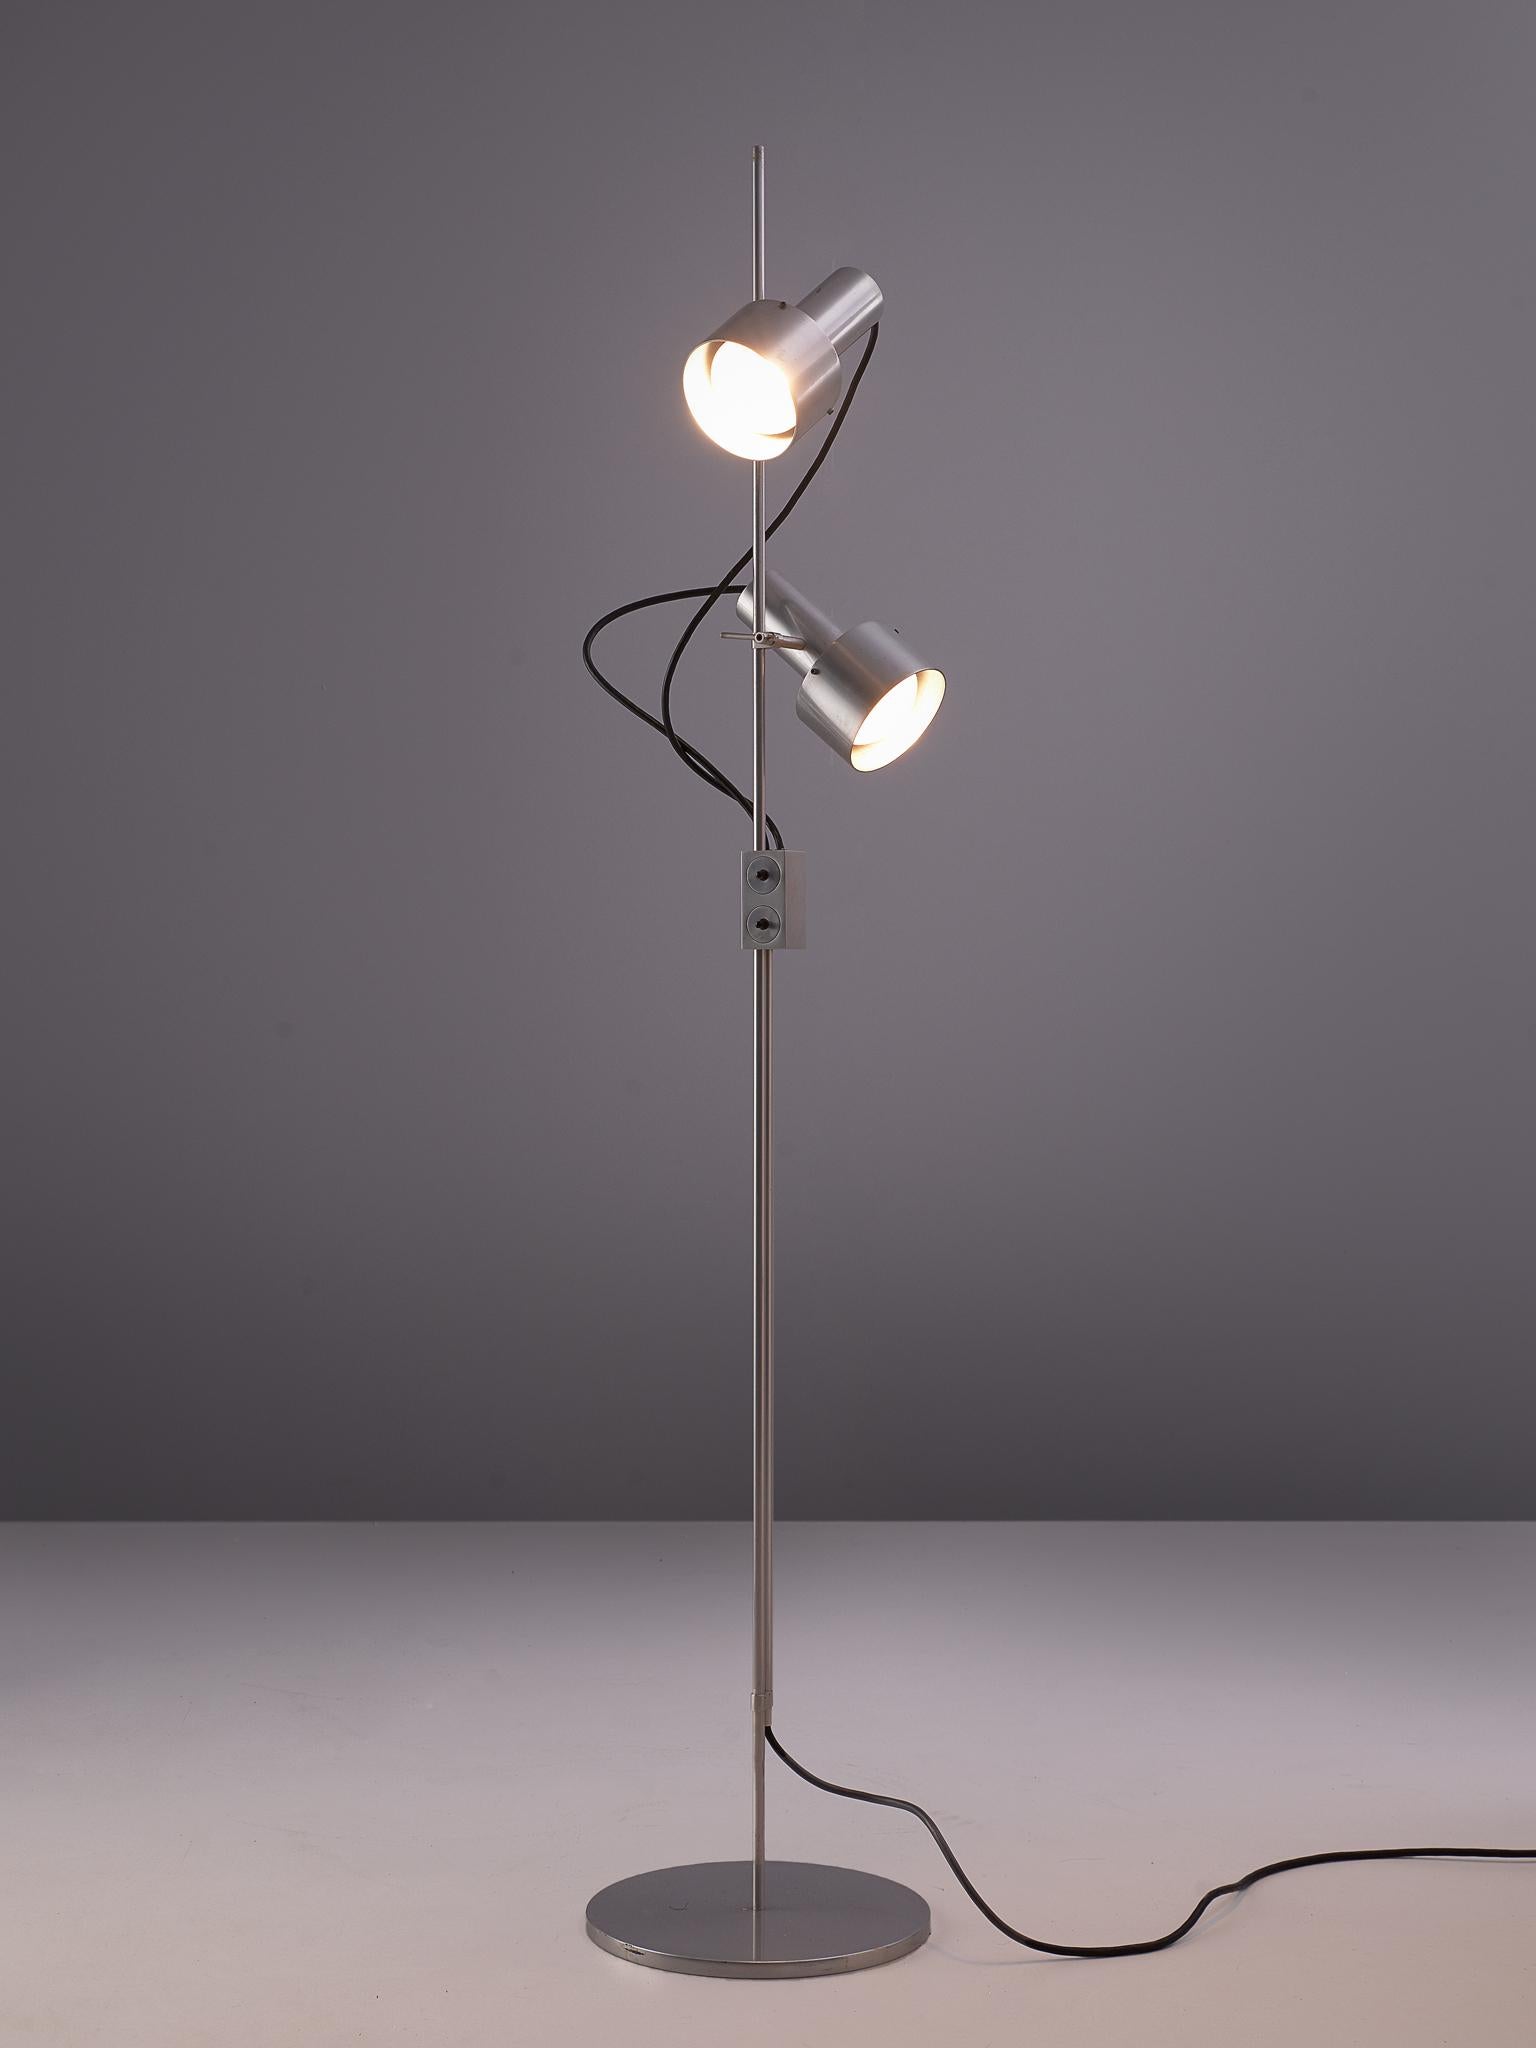 Peter Nelson for Architectural Lighting, floor lamp, aluminum, United Kingdom, circa 1970.

This floor lamp is designed by Peter Nelson and manufactured by Architectural Lighting. It is an engineered piece executed in aluminum and therefore gives